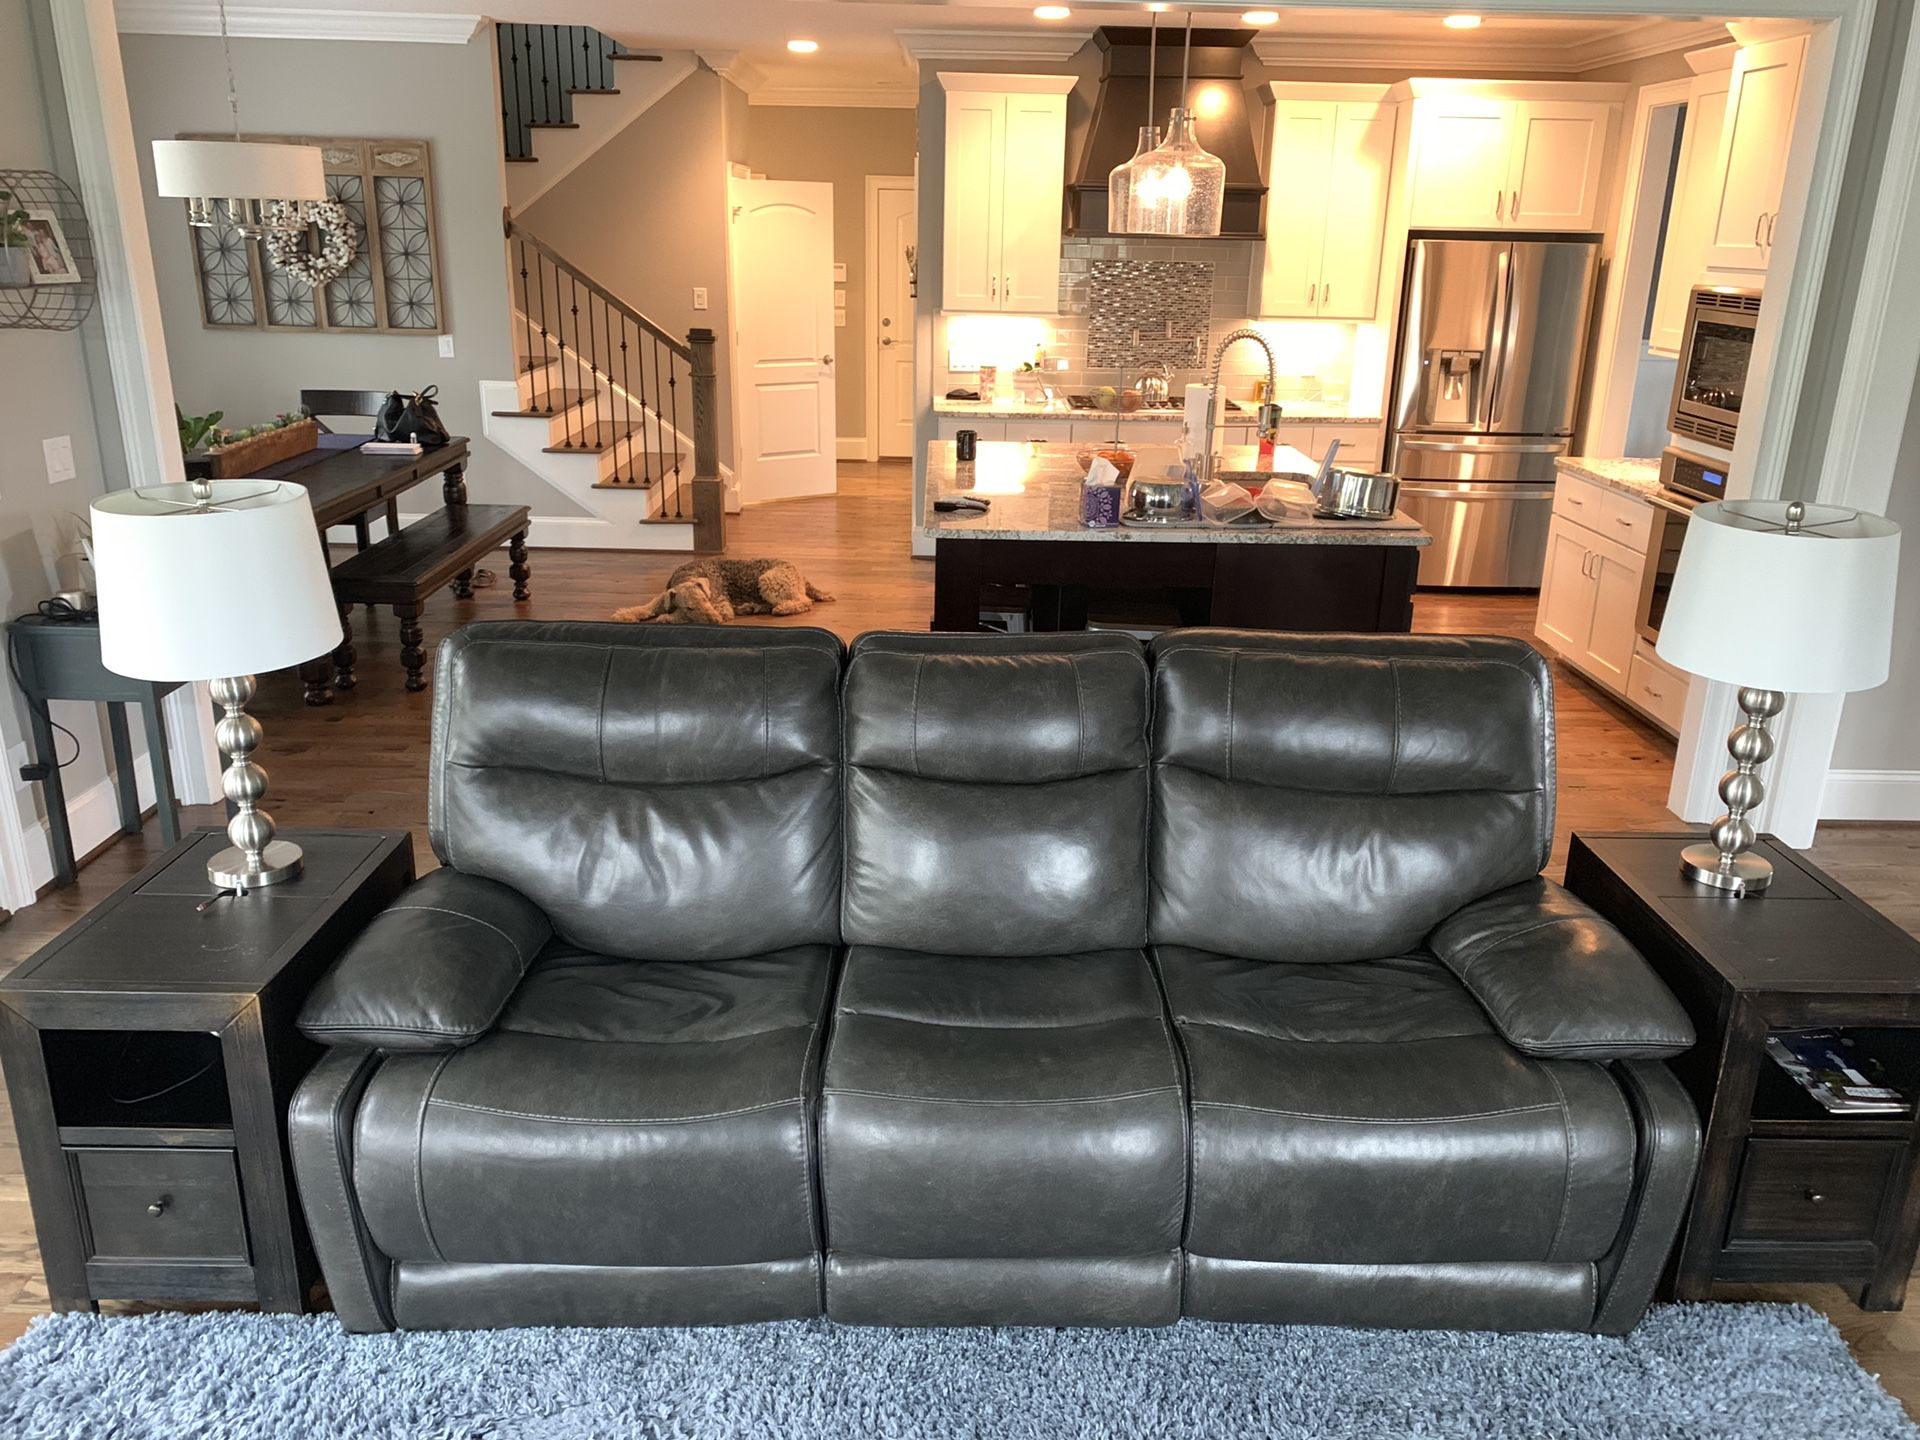 Reclining Leather Sofa, End Tables & Lamps ALL for $500